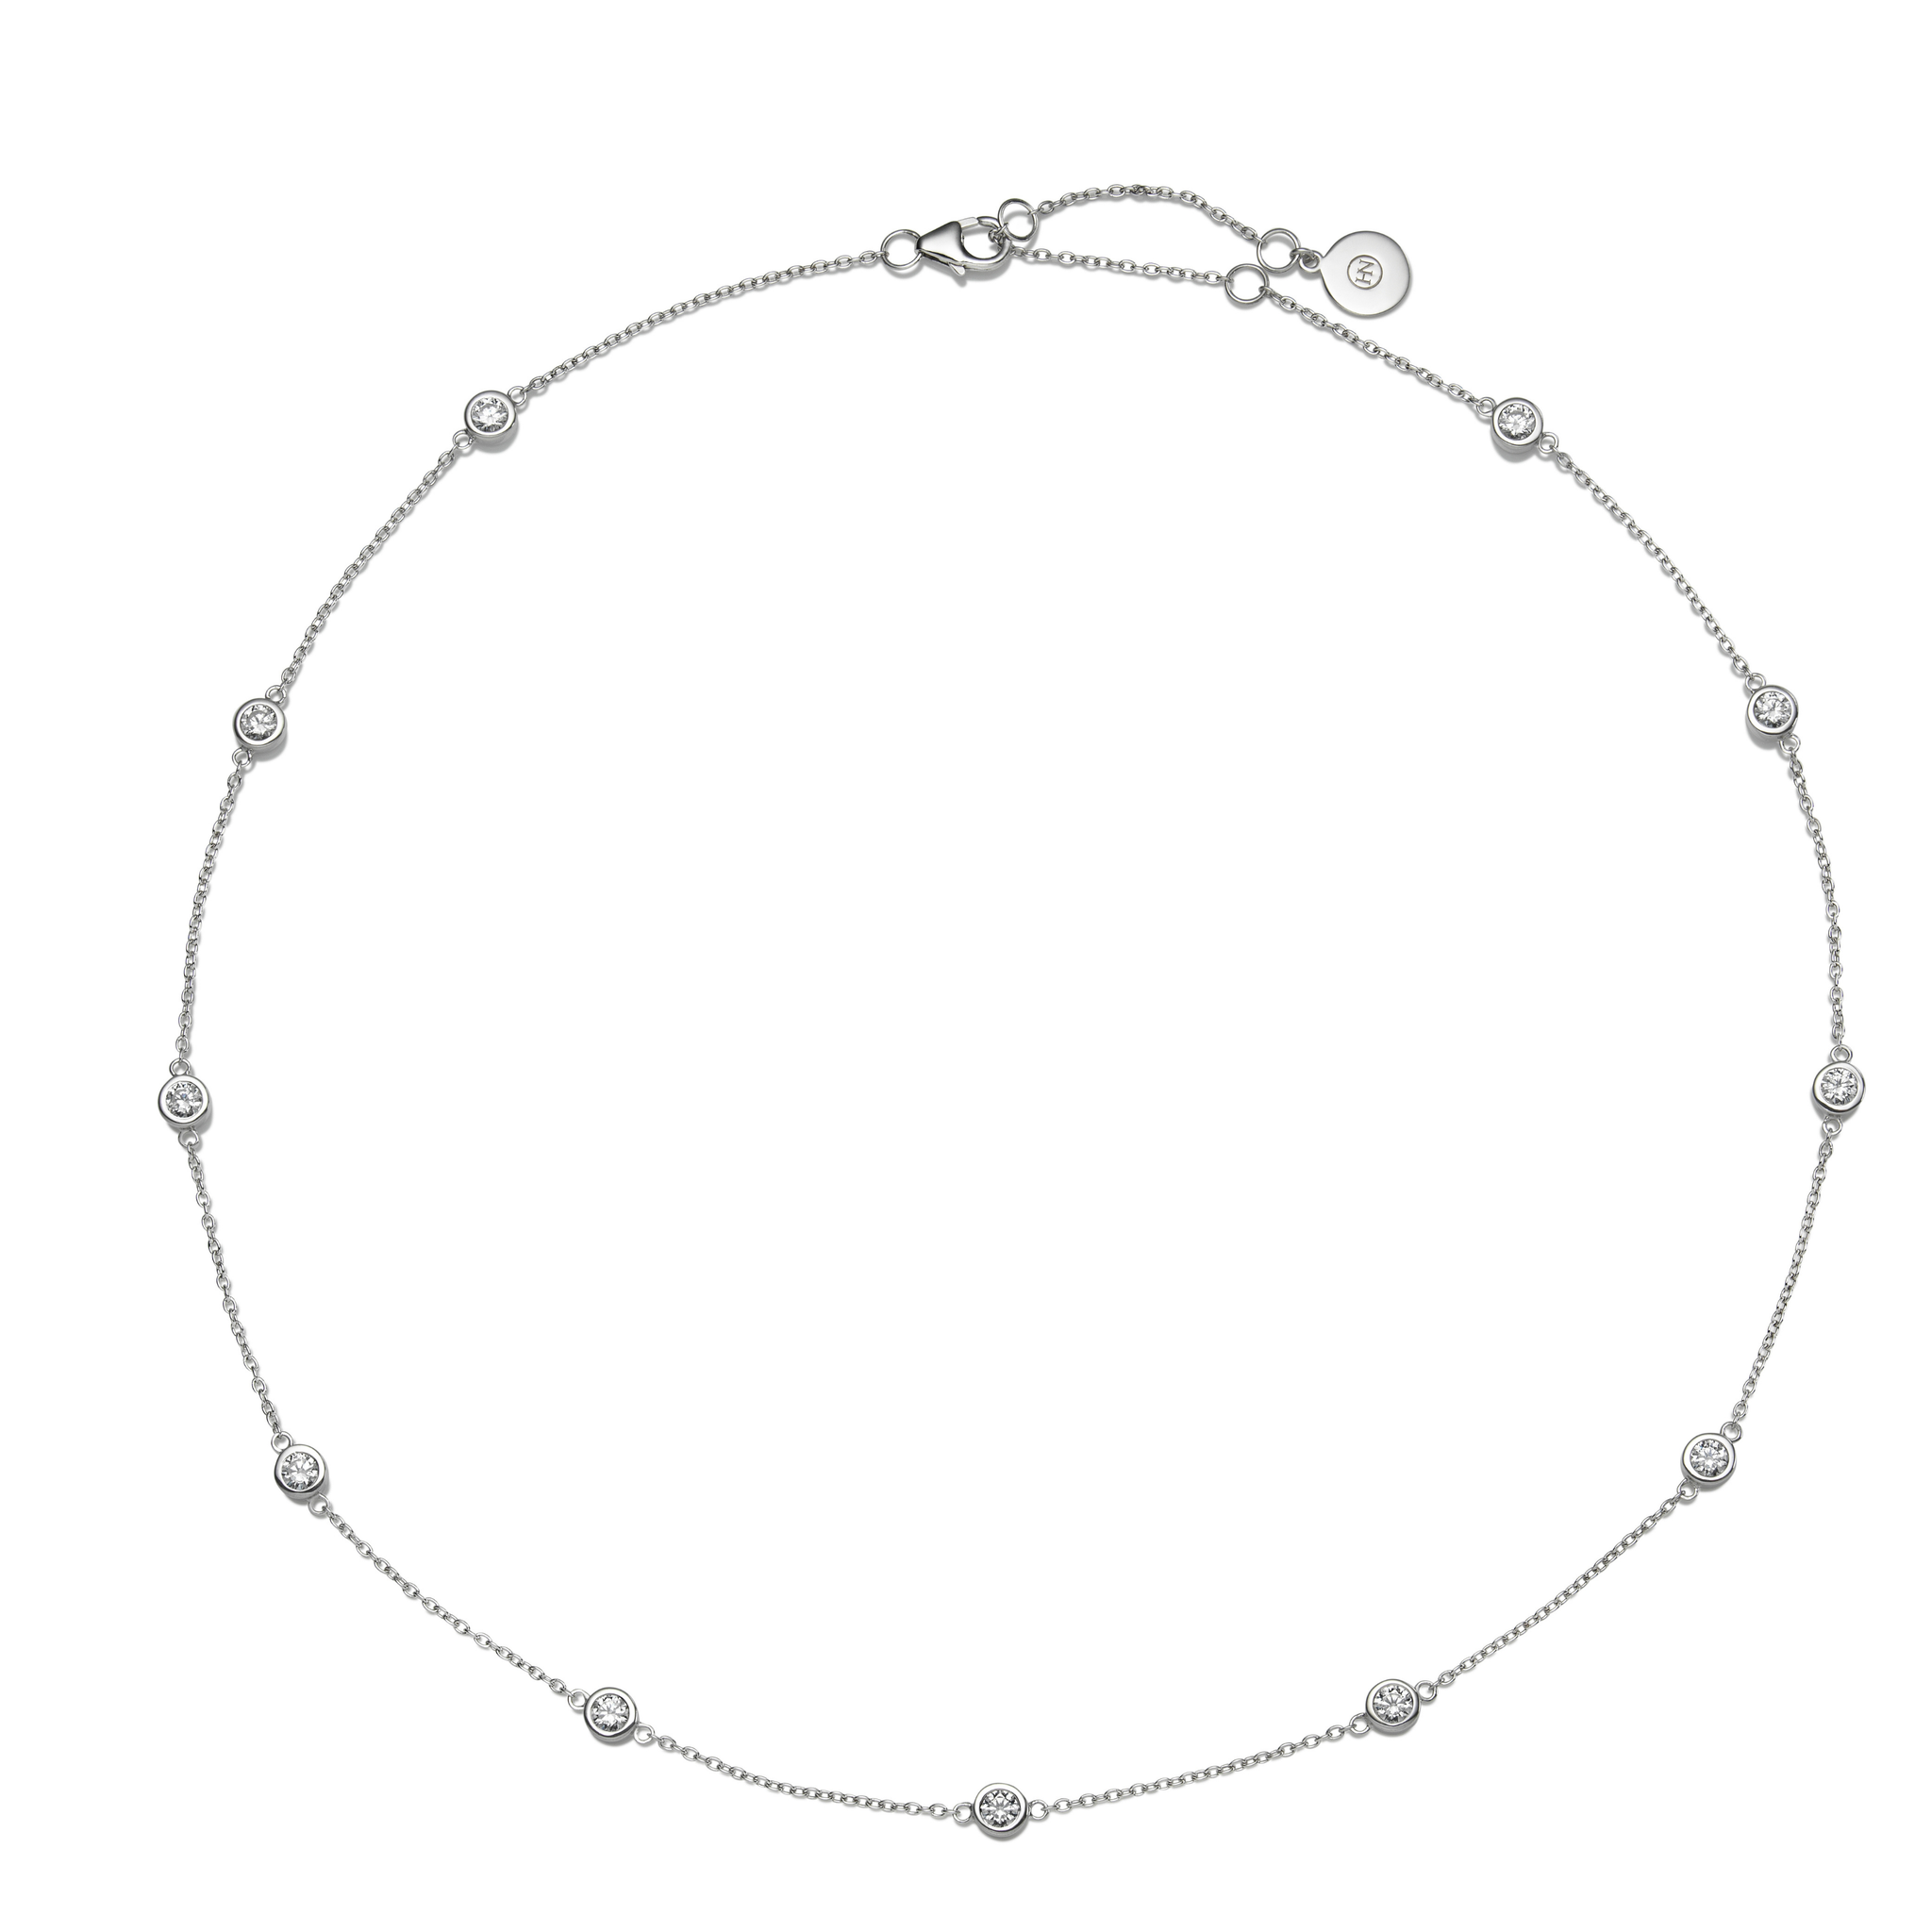 The Silver 'Diamonds' By The Metre Necklace